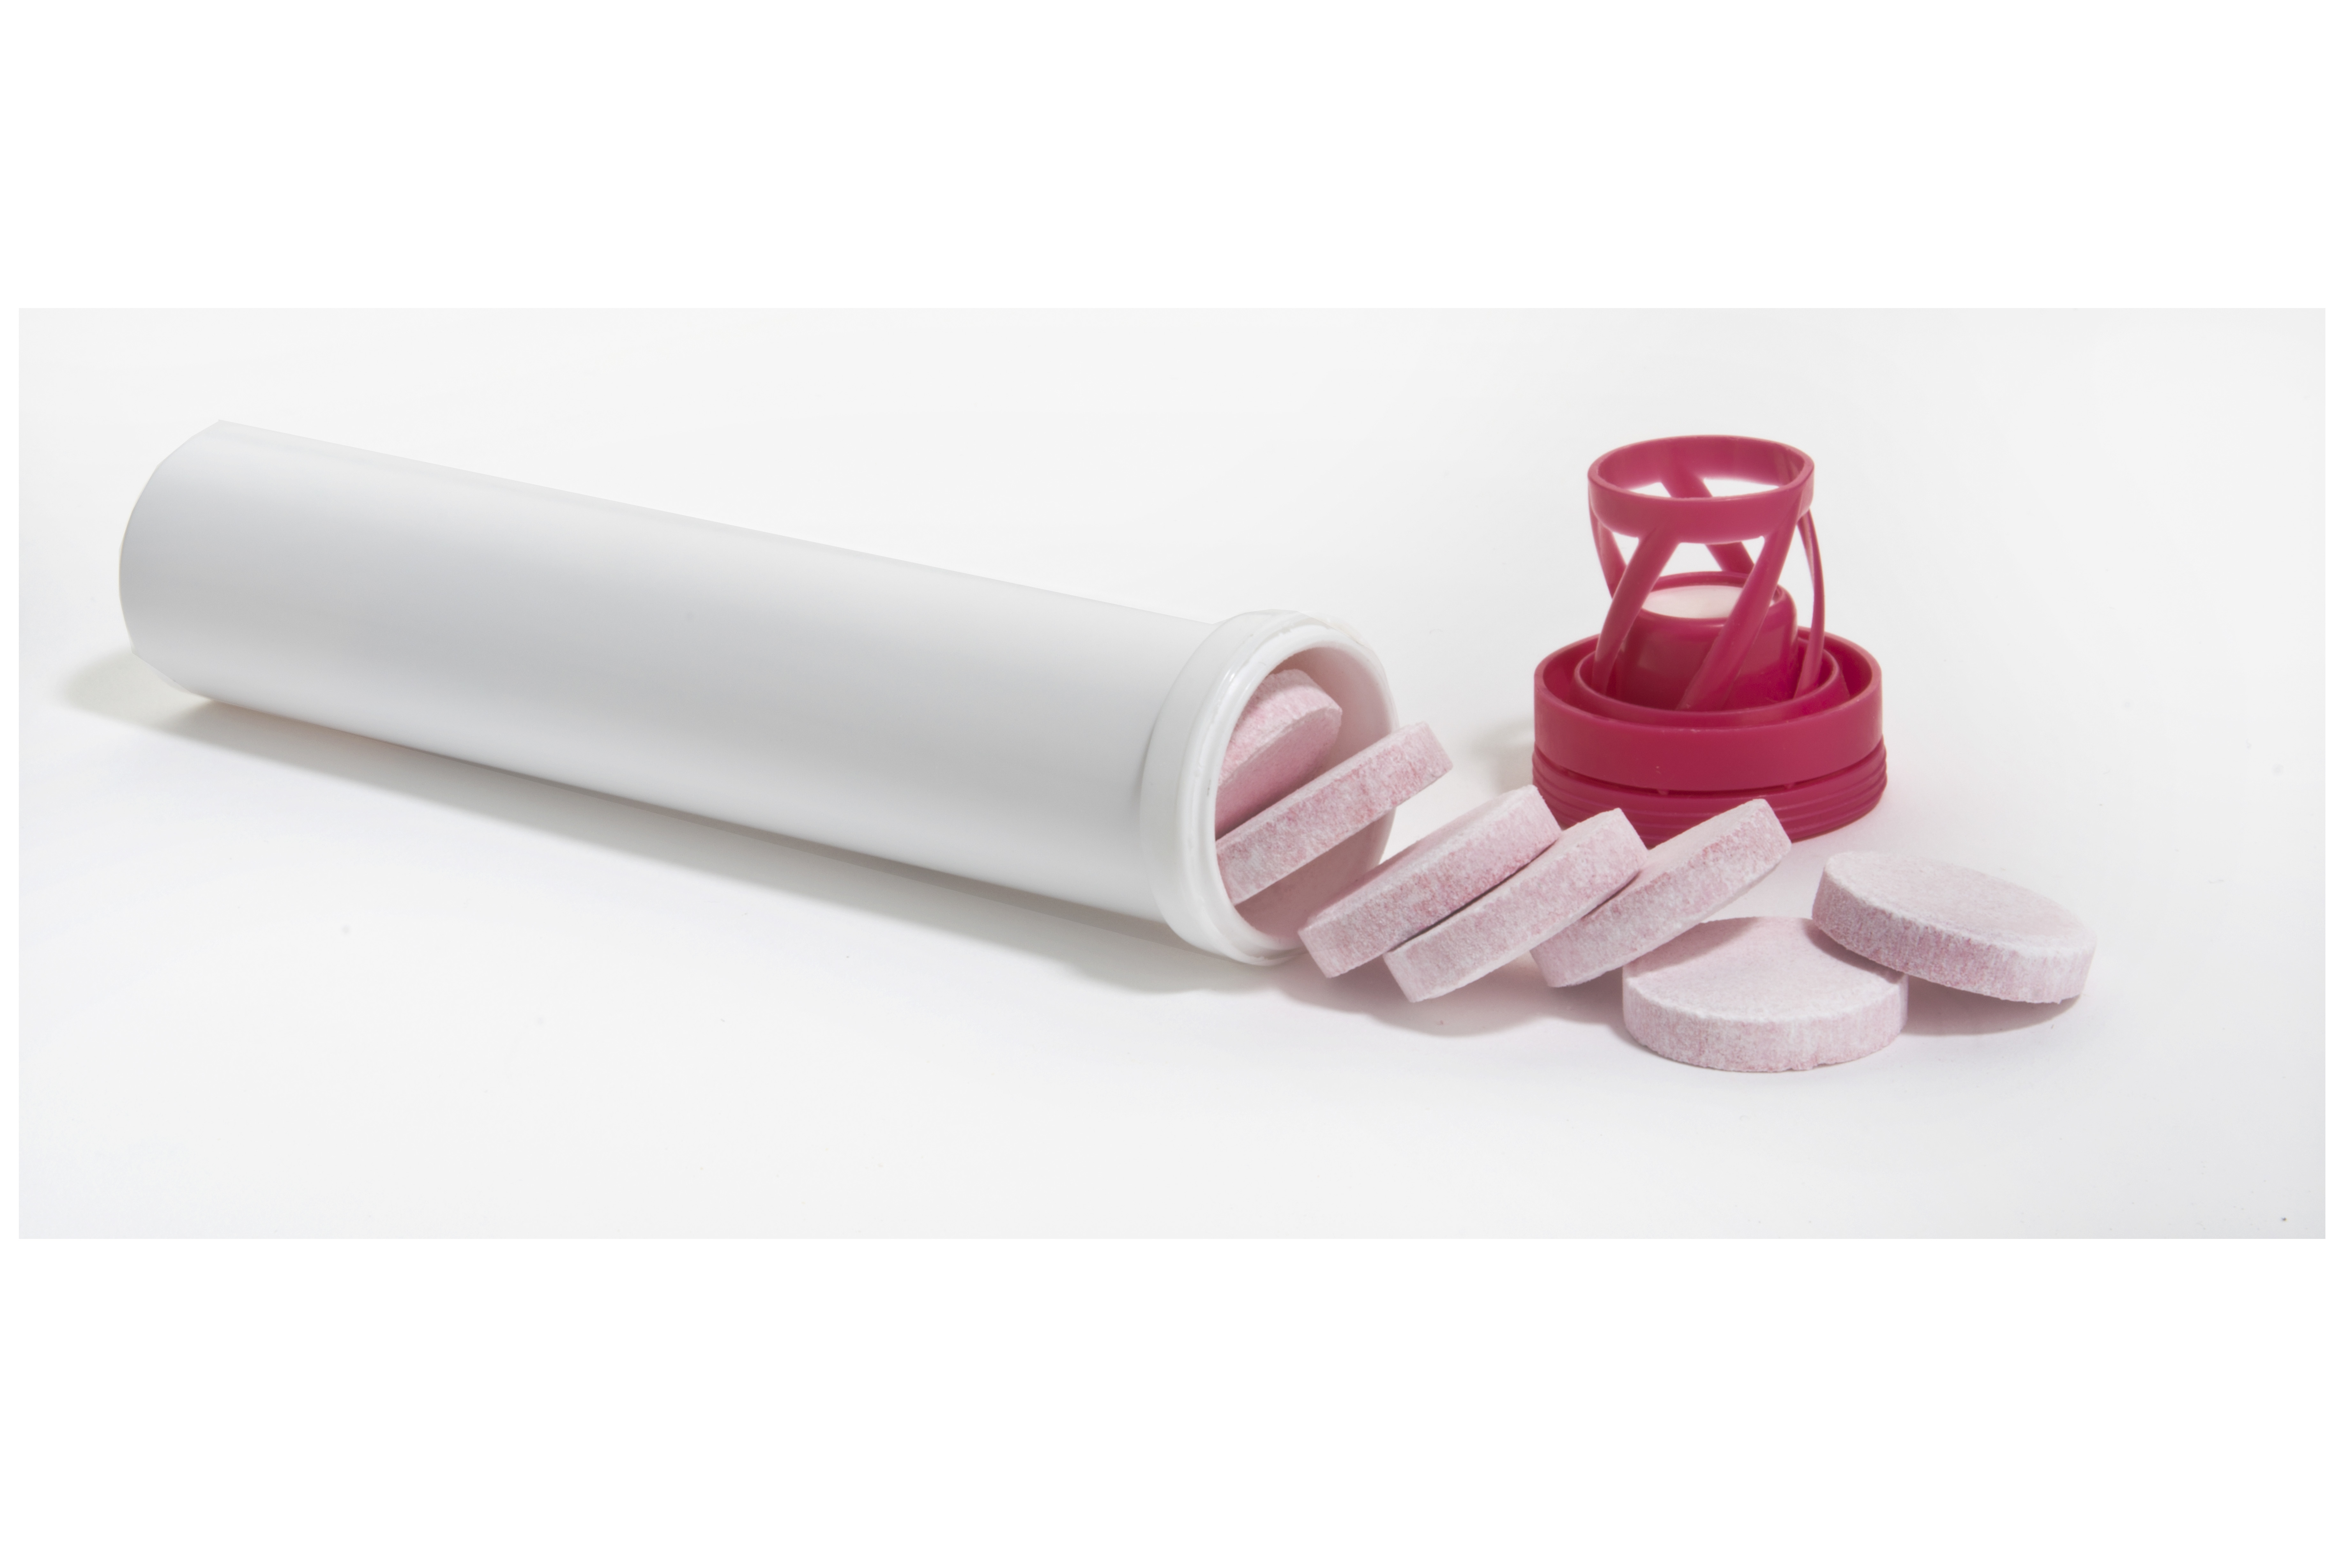 Clariant Launches New Tube & Stopper Package to Serve Vietnam Market. (Photo: Clariant)